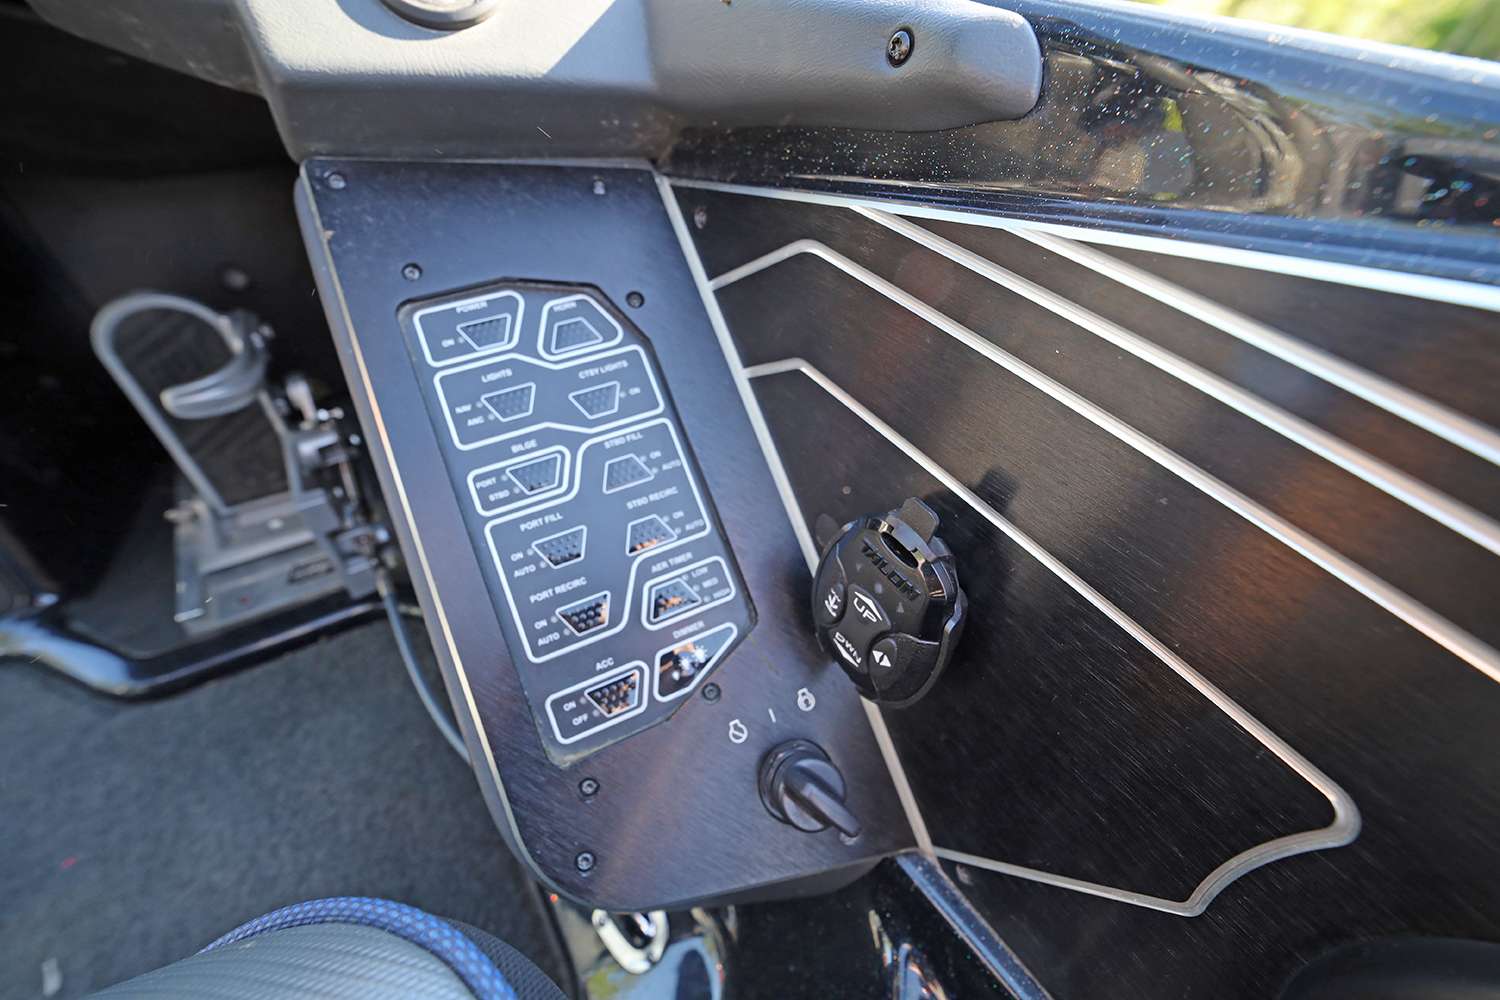 Here's a look at the boat's control panel and a Minn Kota Talon fab. 